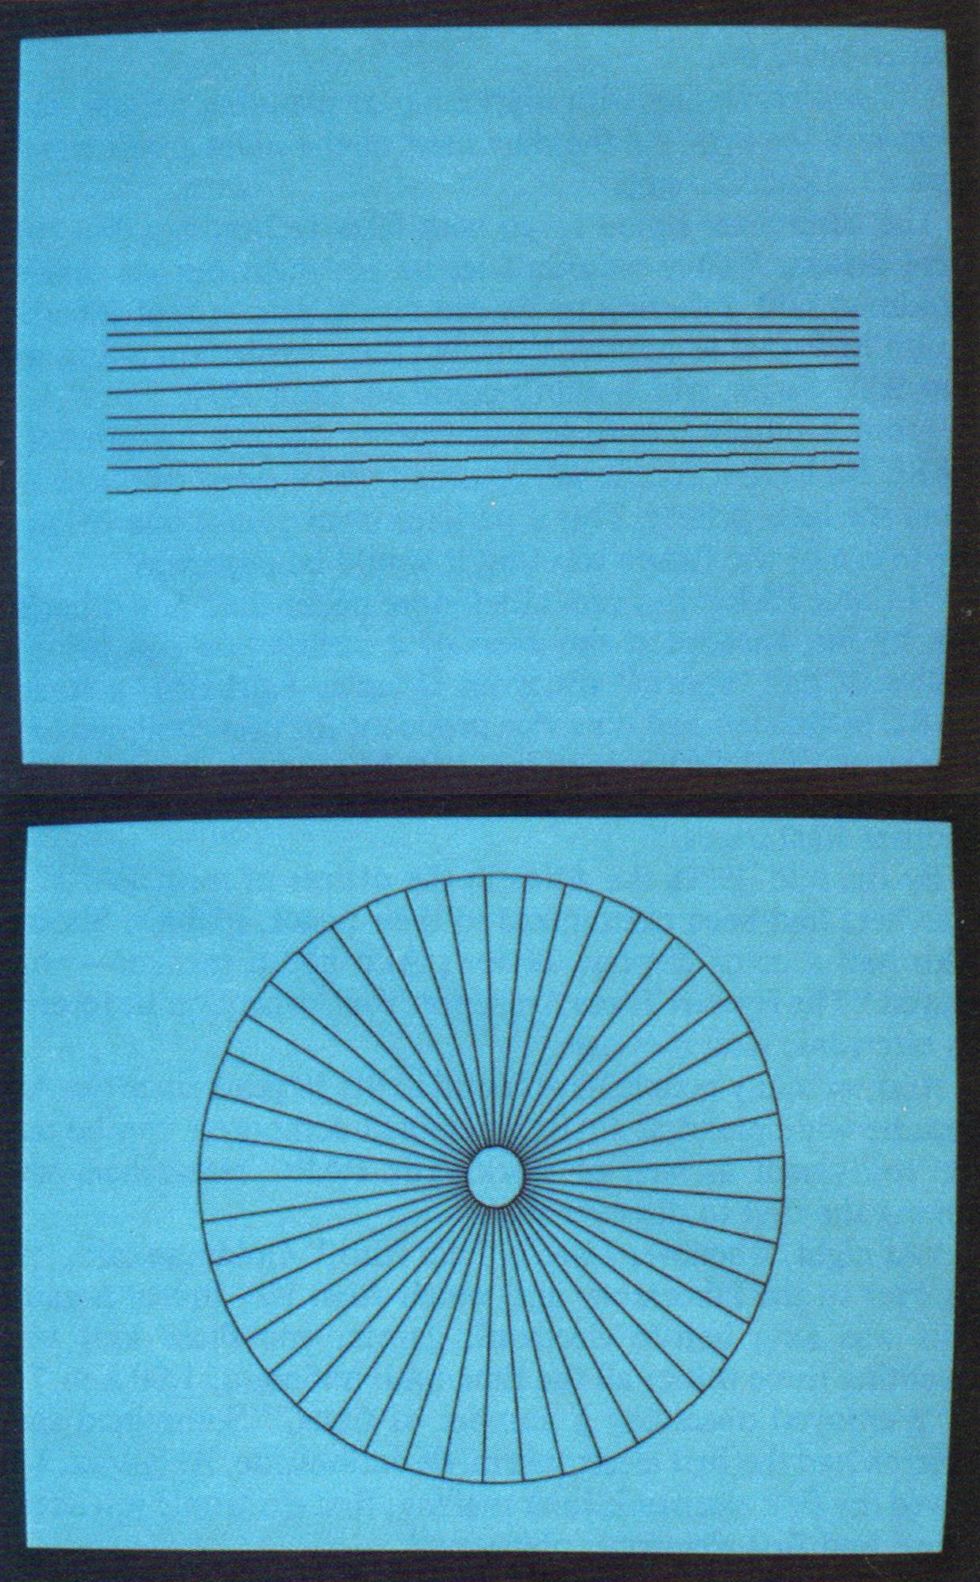 Two computer screens, one showing sets of nearly parallel lines and one showing lines in a wheel pattern